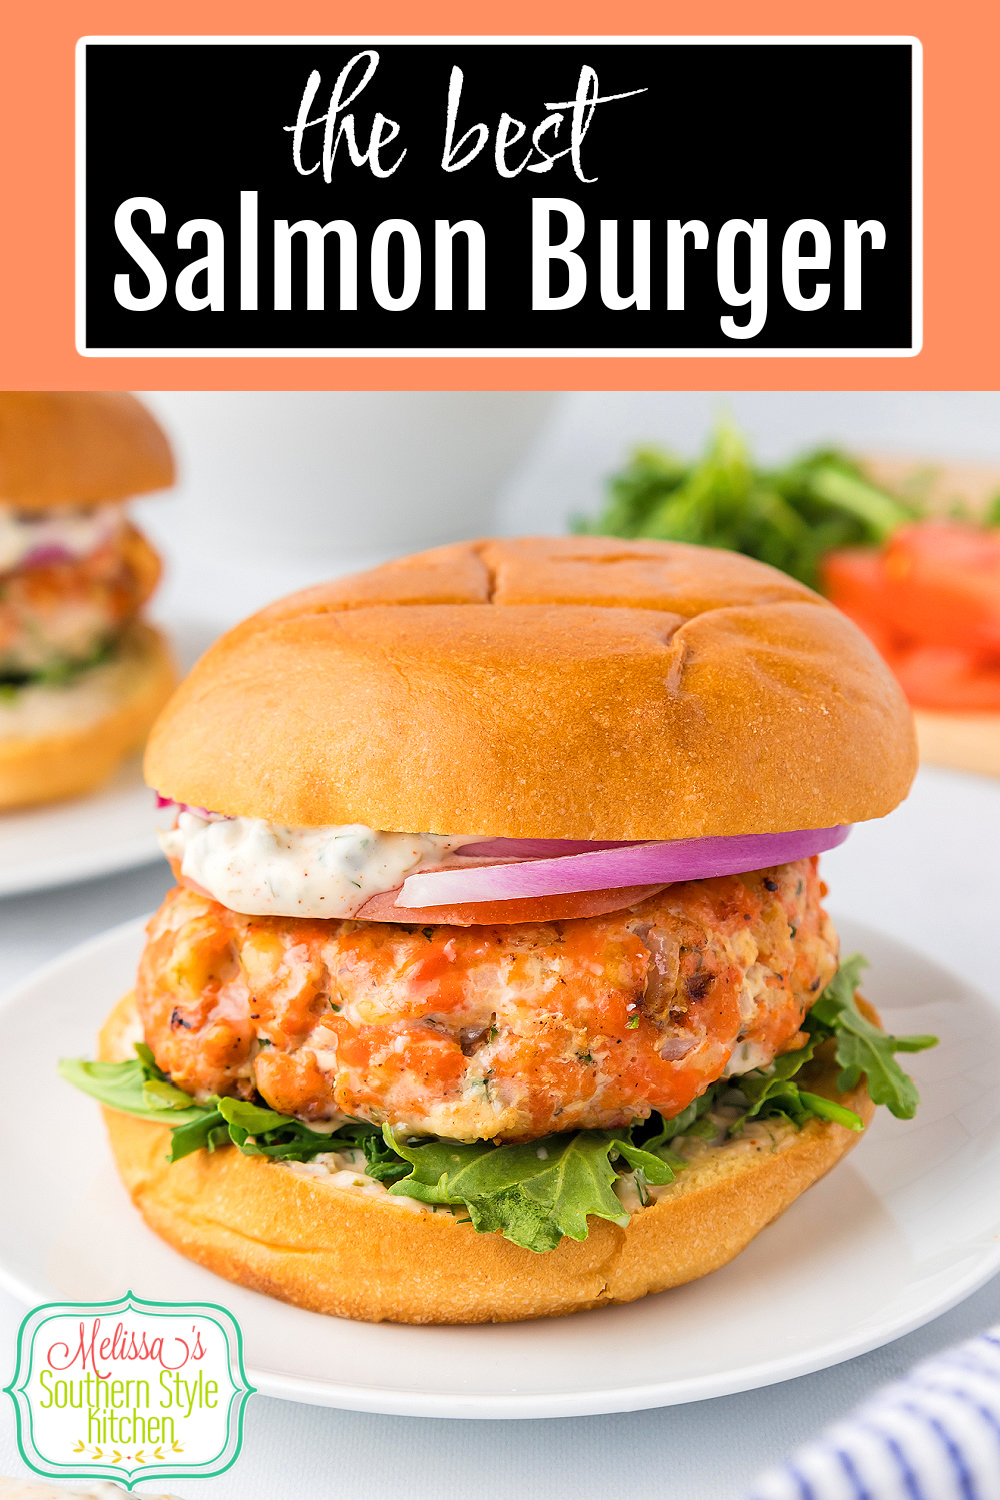 Upgrade your burger menu with this Salmon Burger recipe served on toasted buns with fresh toppings and drizzled with a remoulade sauce. #salmonrecipes #salmonburgers #easyburgerrecipes #grilledsalmon #freshsalmonrecipes via @melissasssk